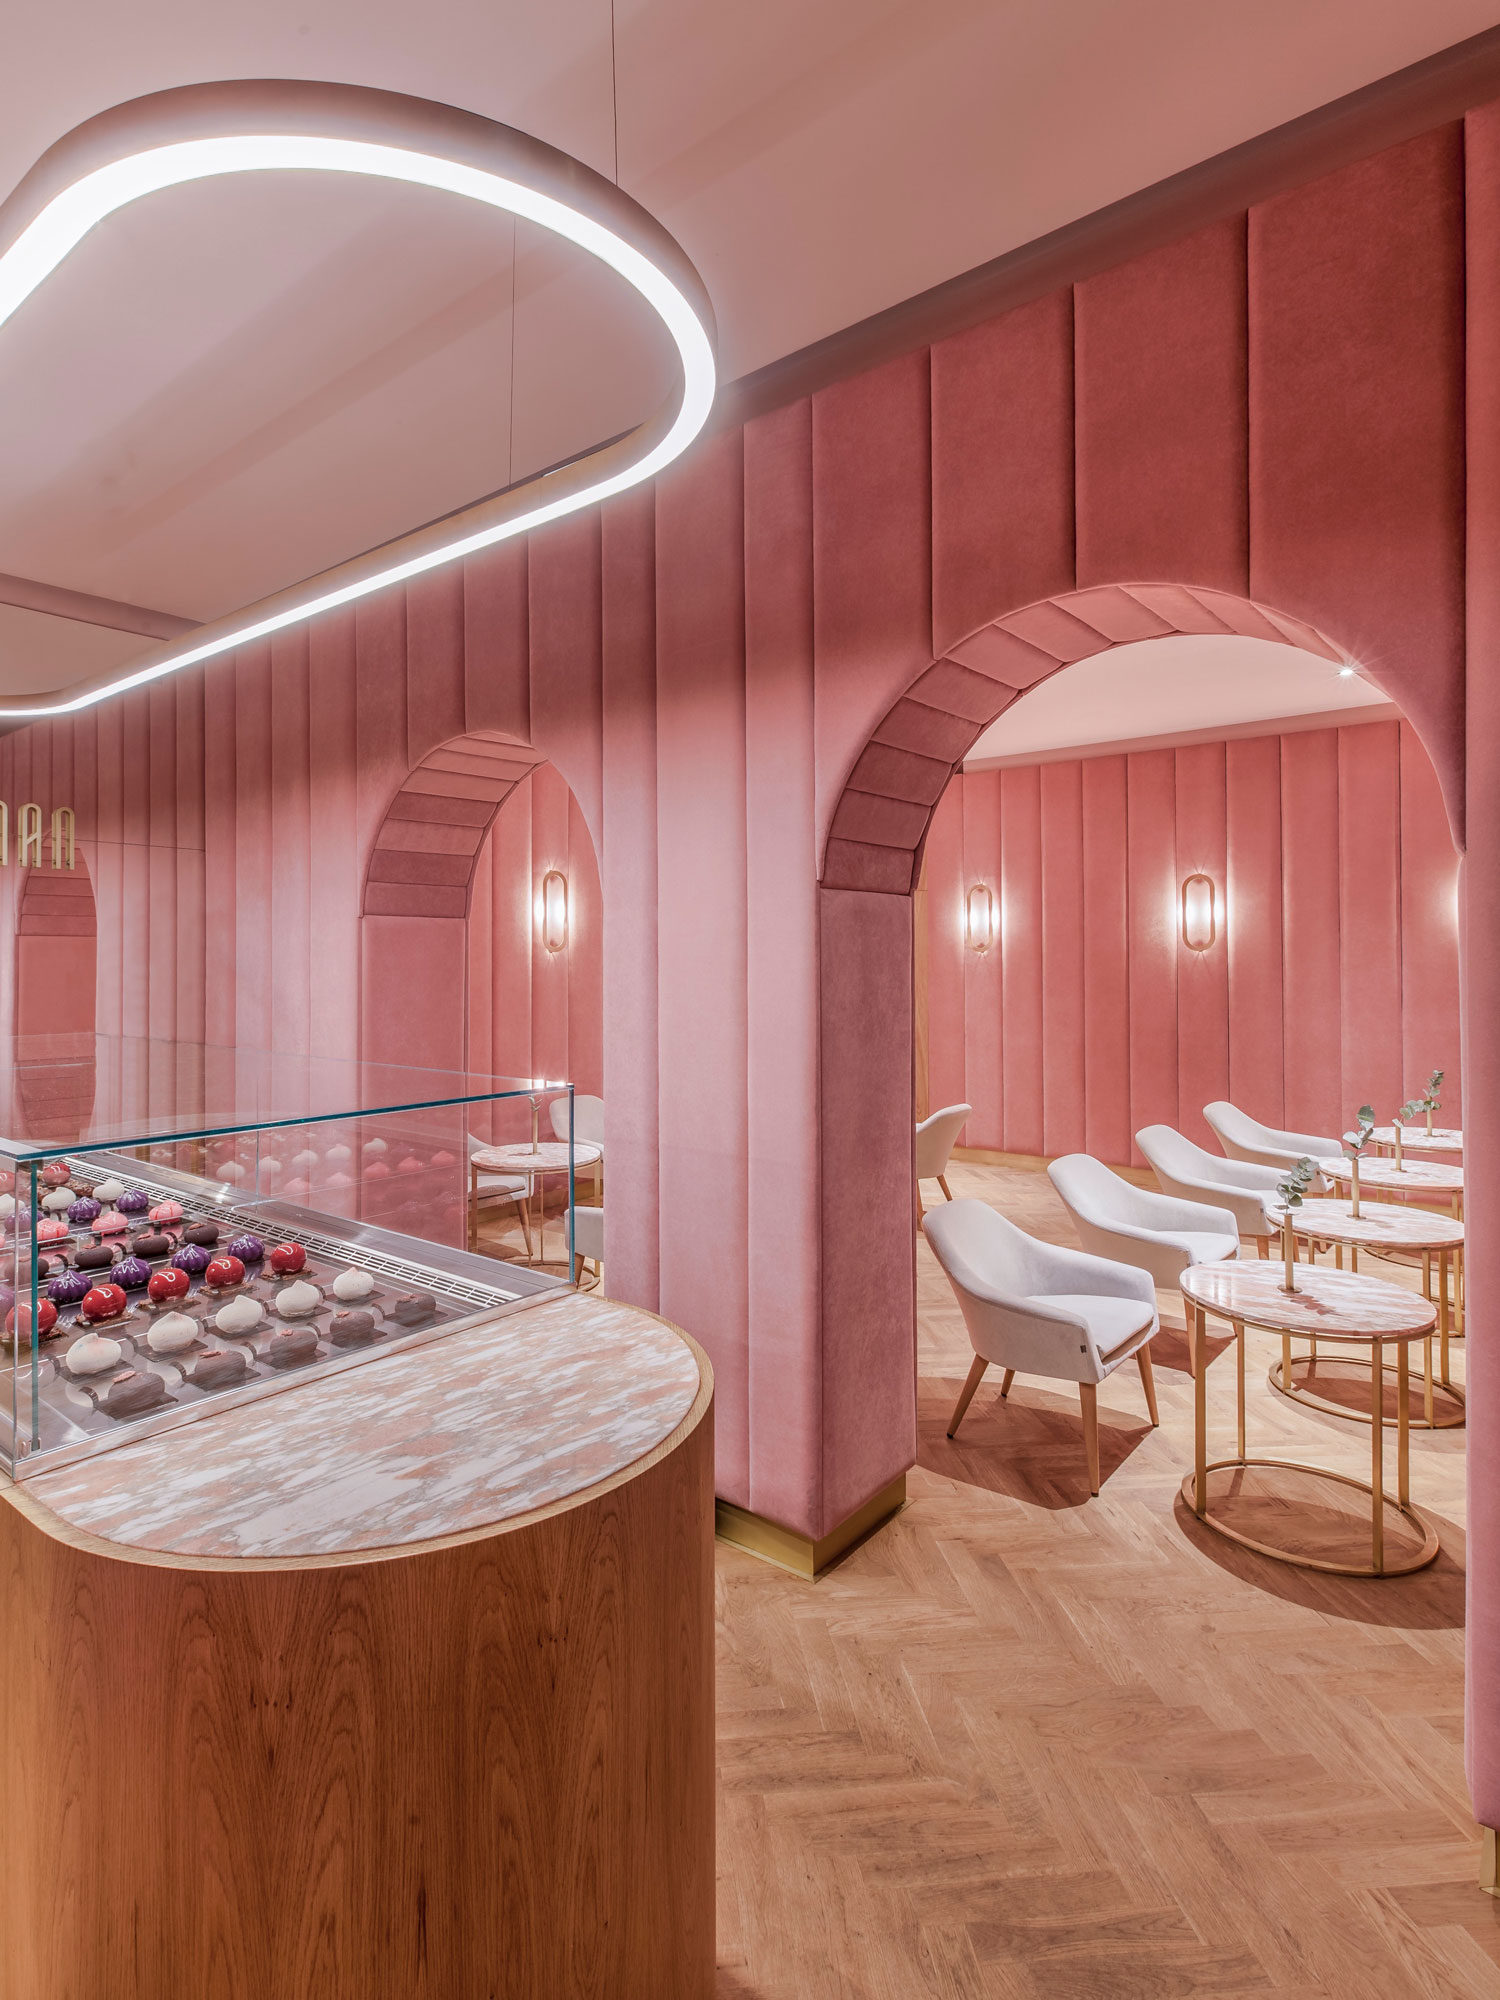 Places: The NANAN Patisserie in Wroclaw, Poland